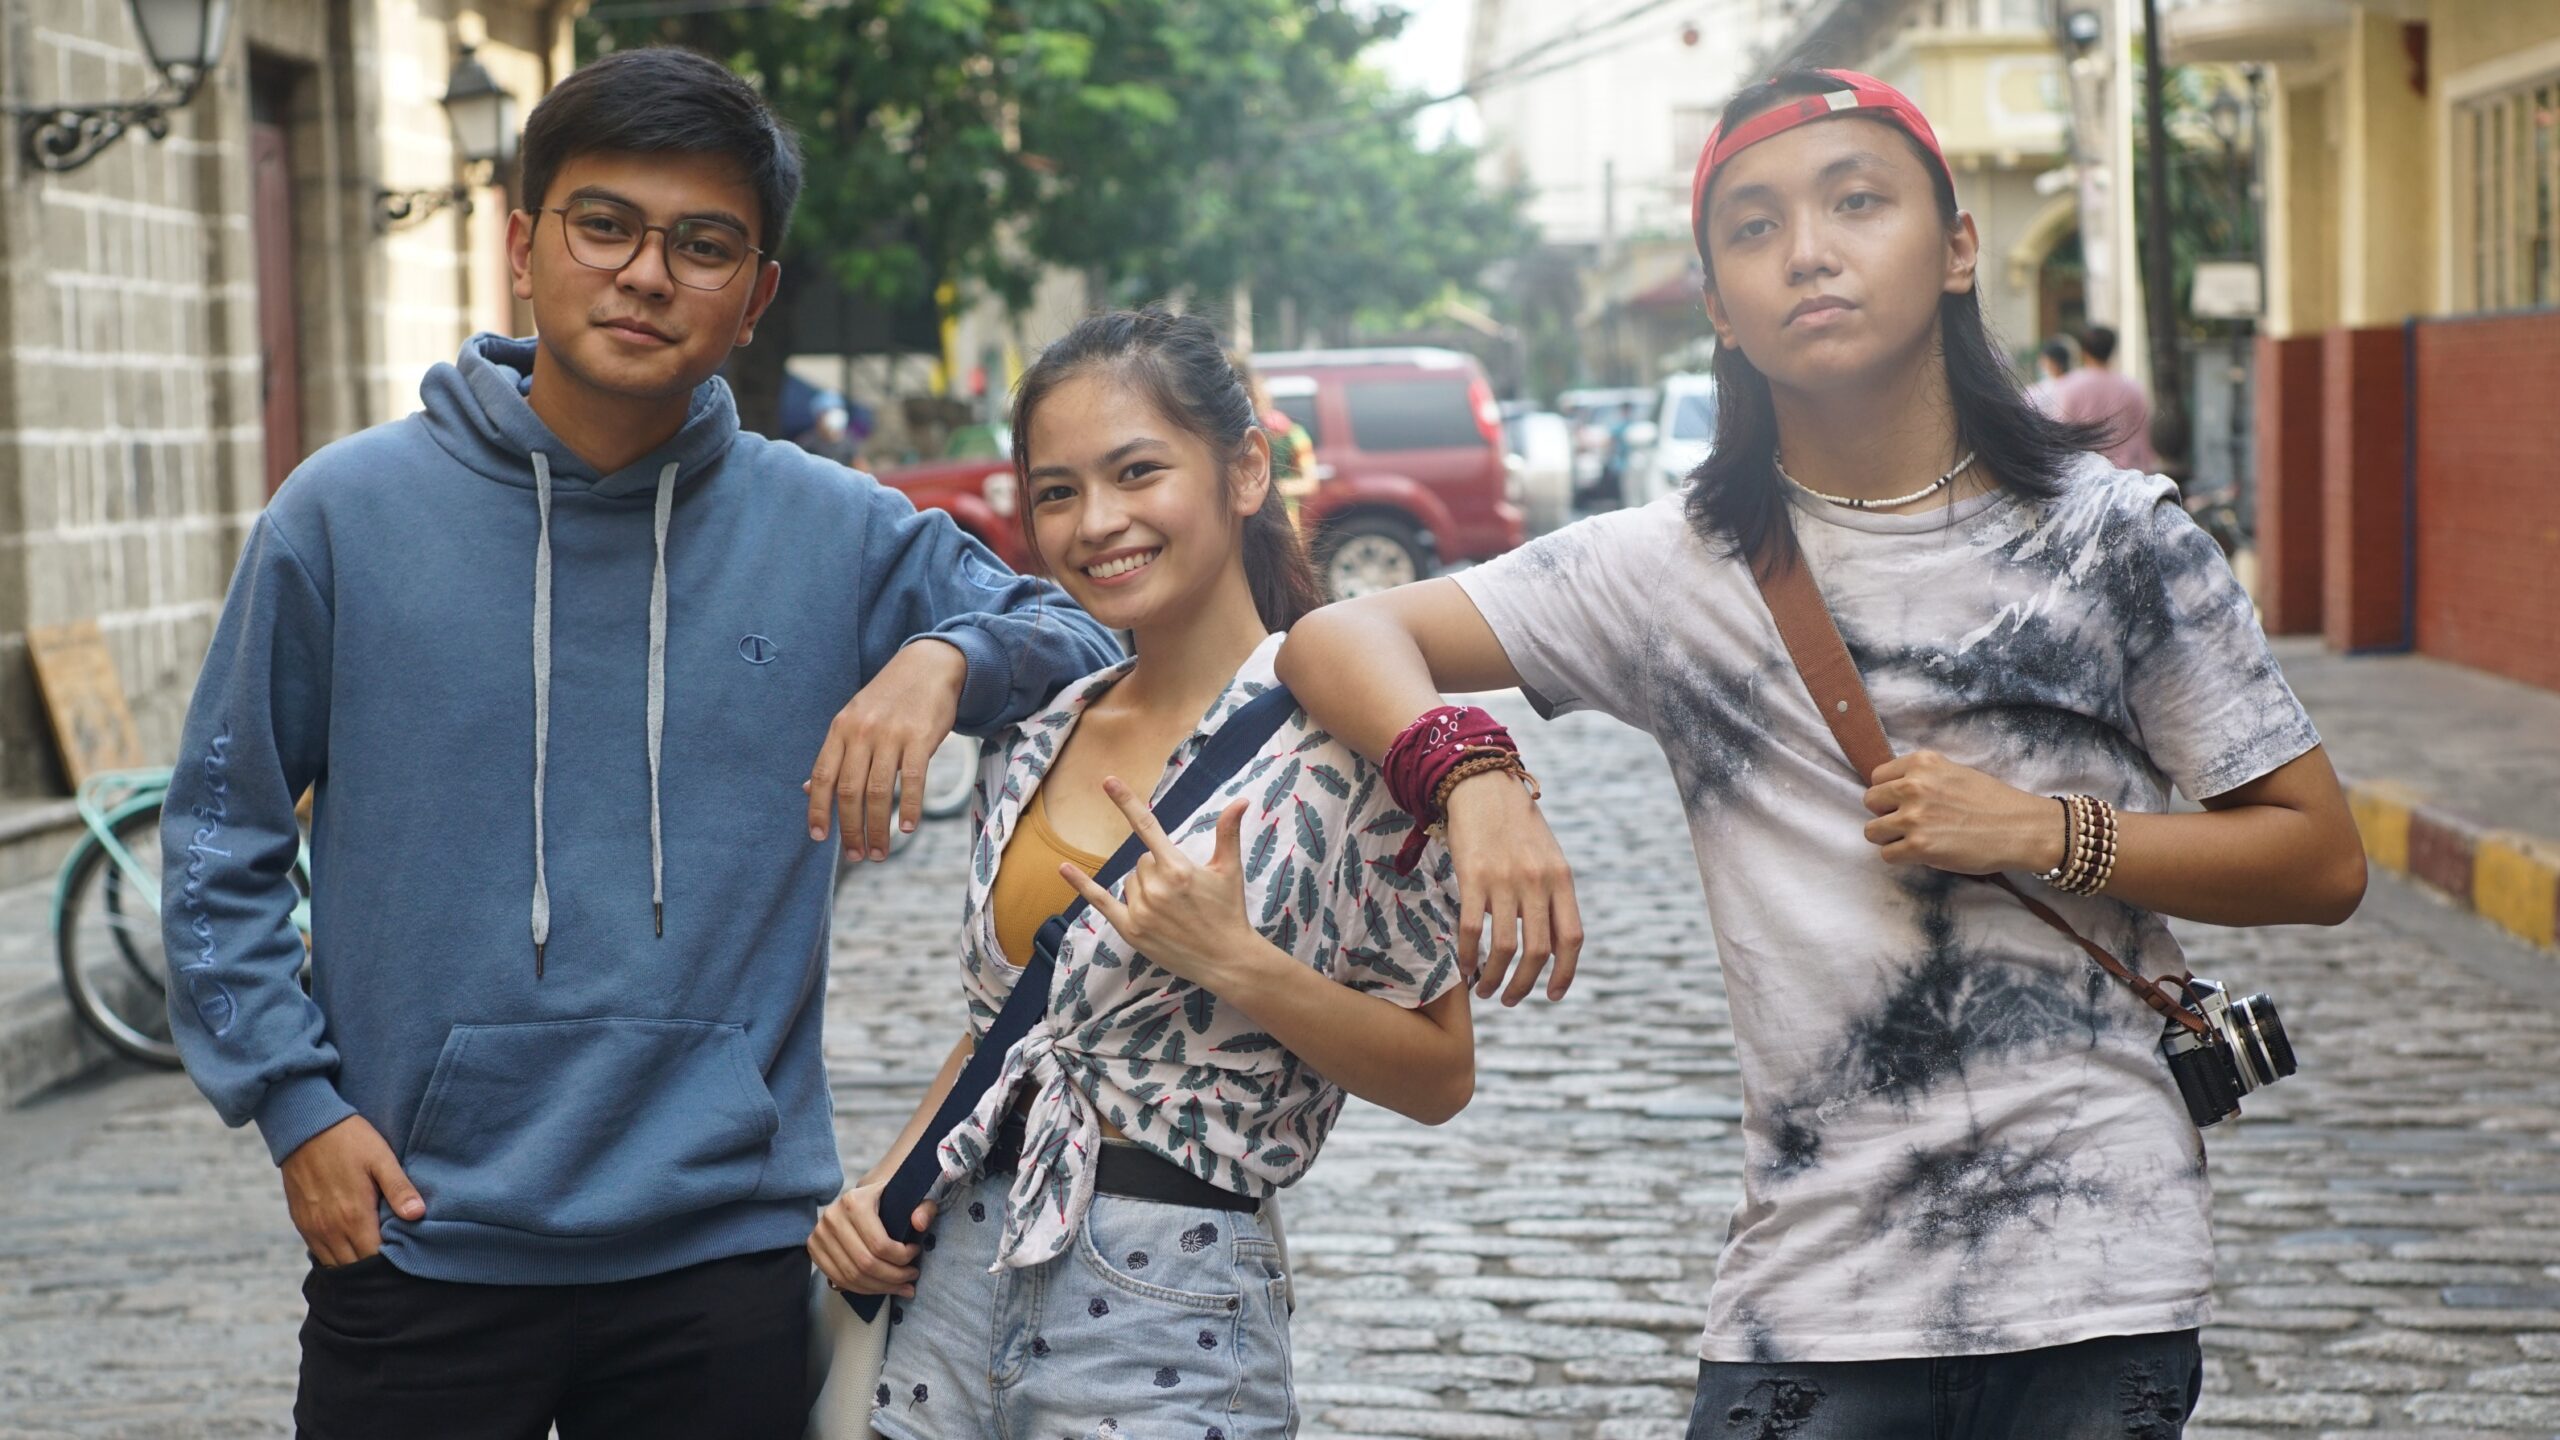 How PH theater helps address underage drinking among youth